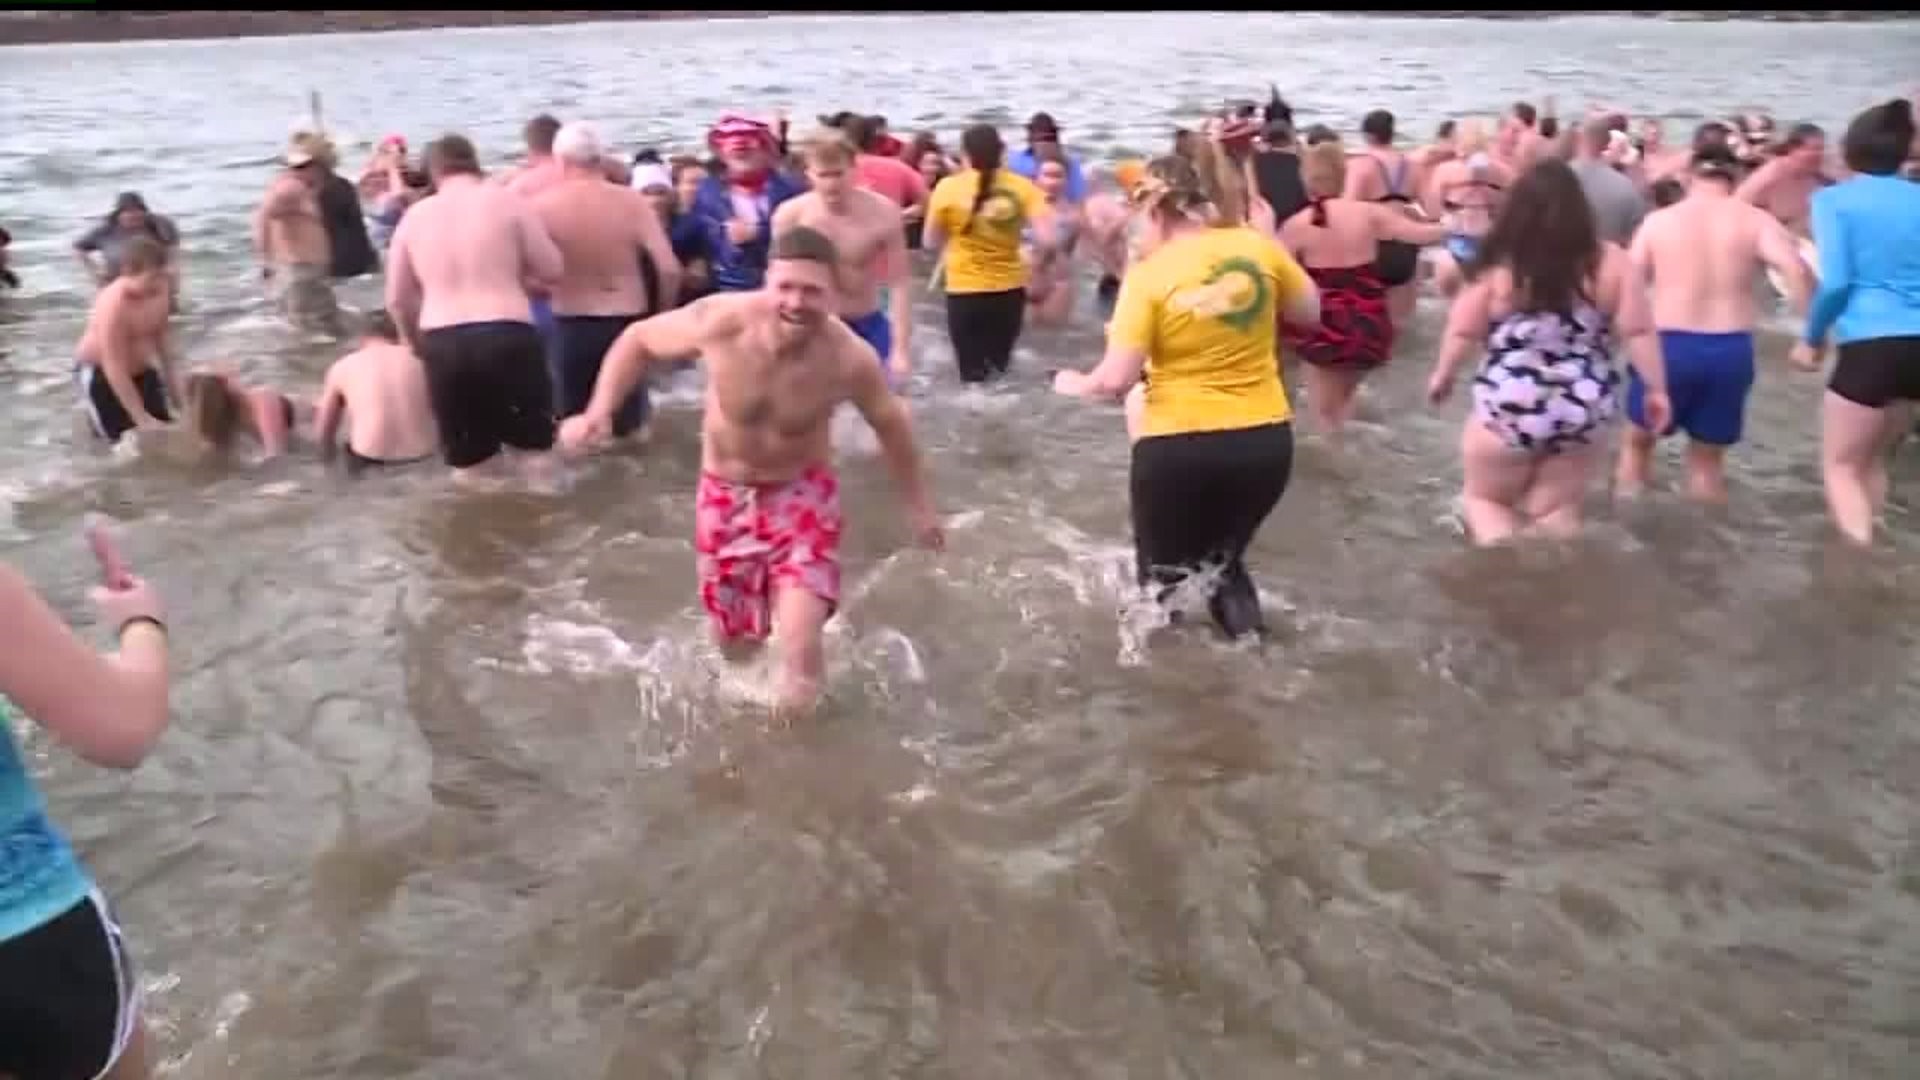 22nd annual penguin plunge on City Island